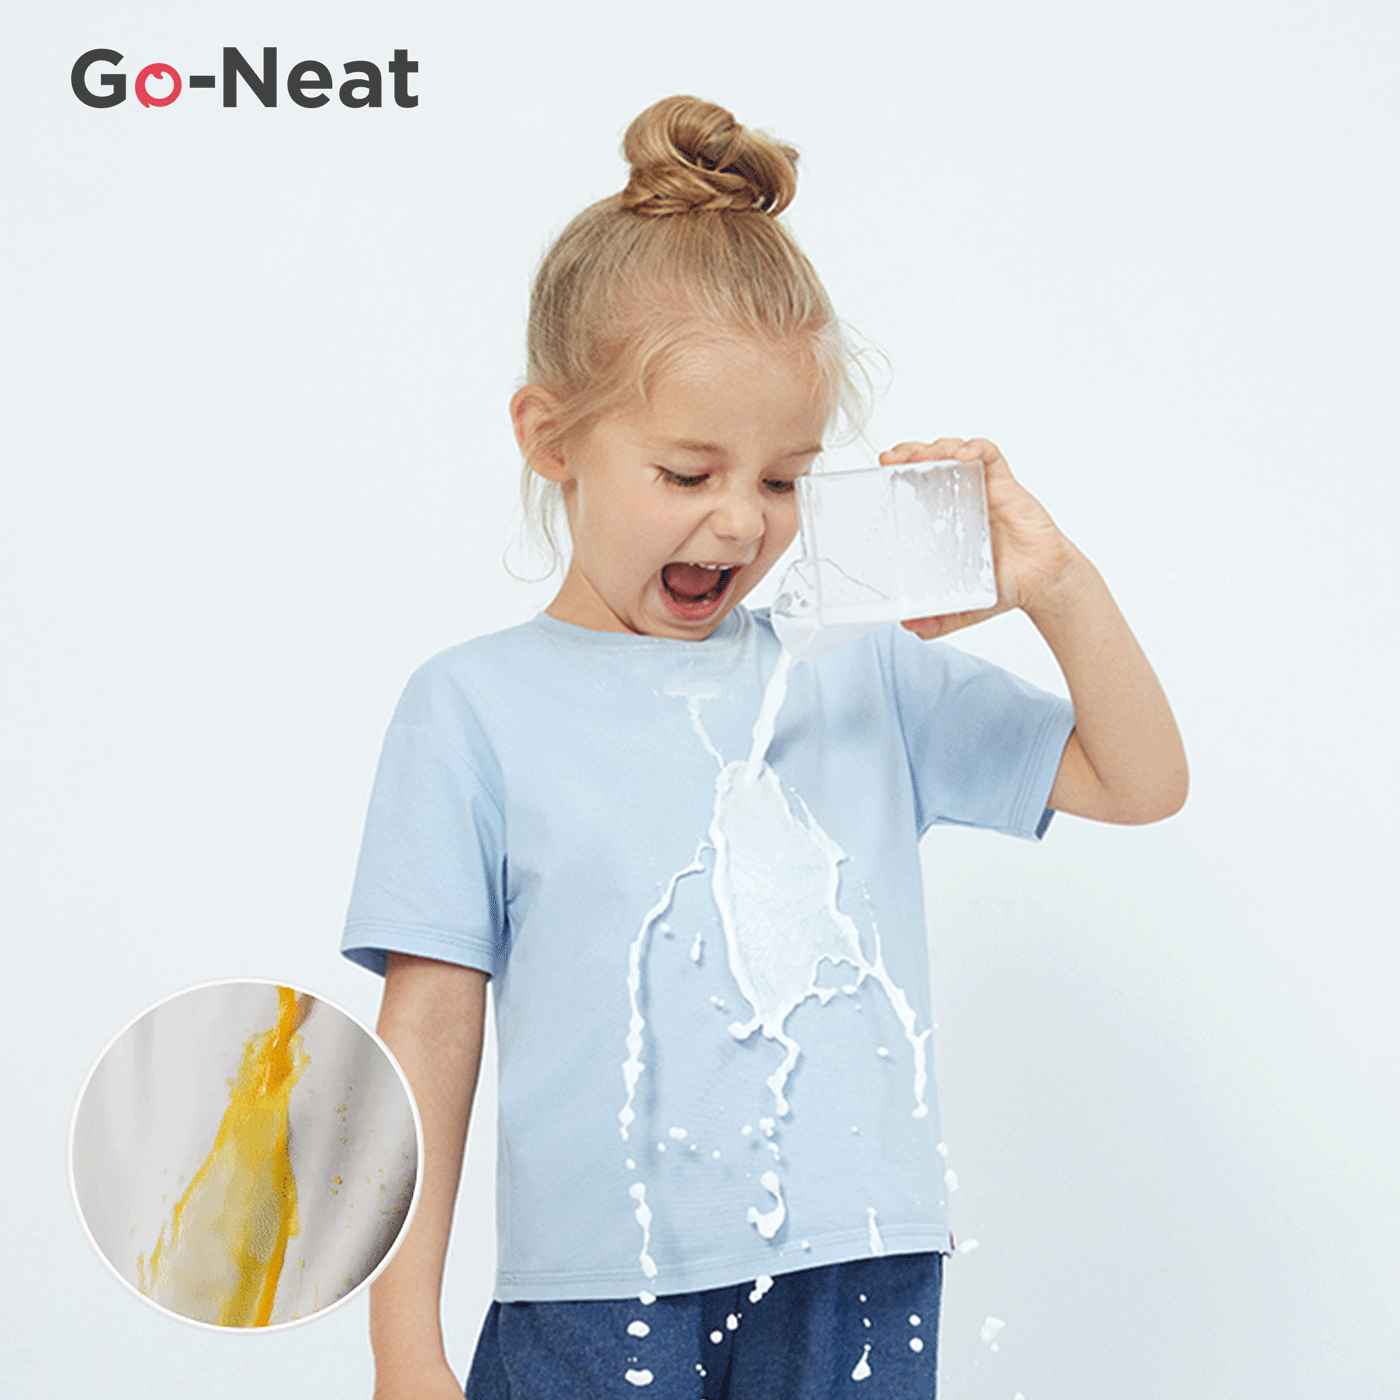 Go-Neat Water Repellent And Stain Resistant T-Shirts For Kids